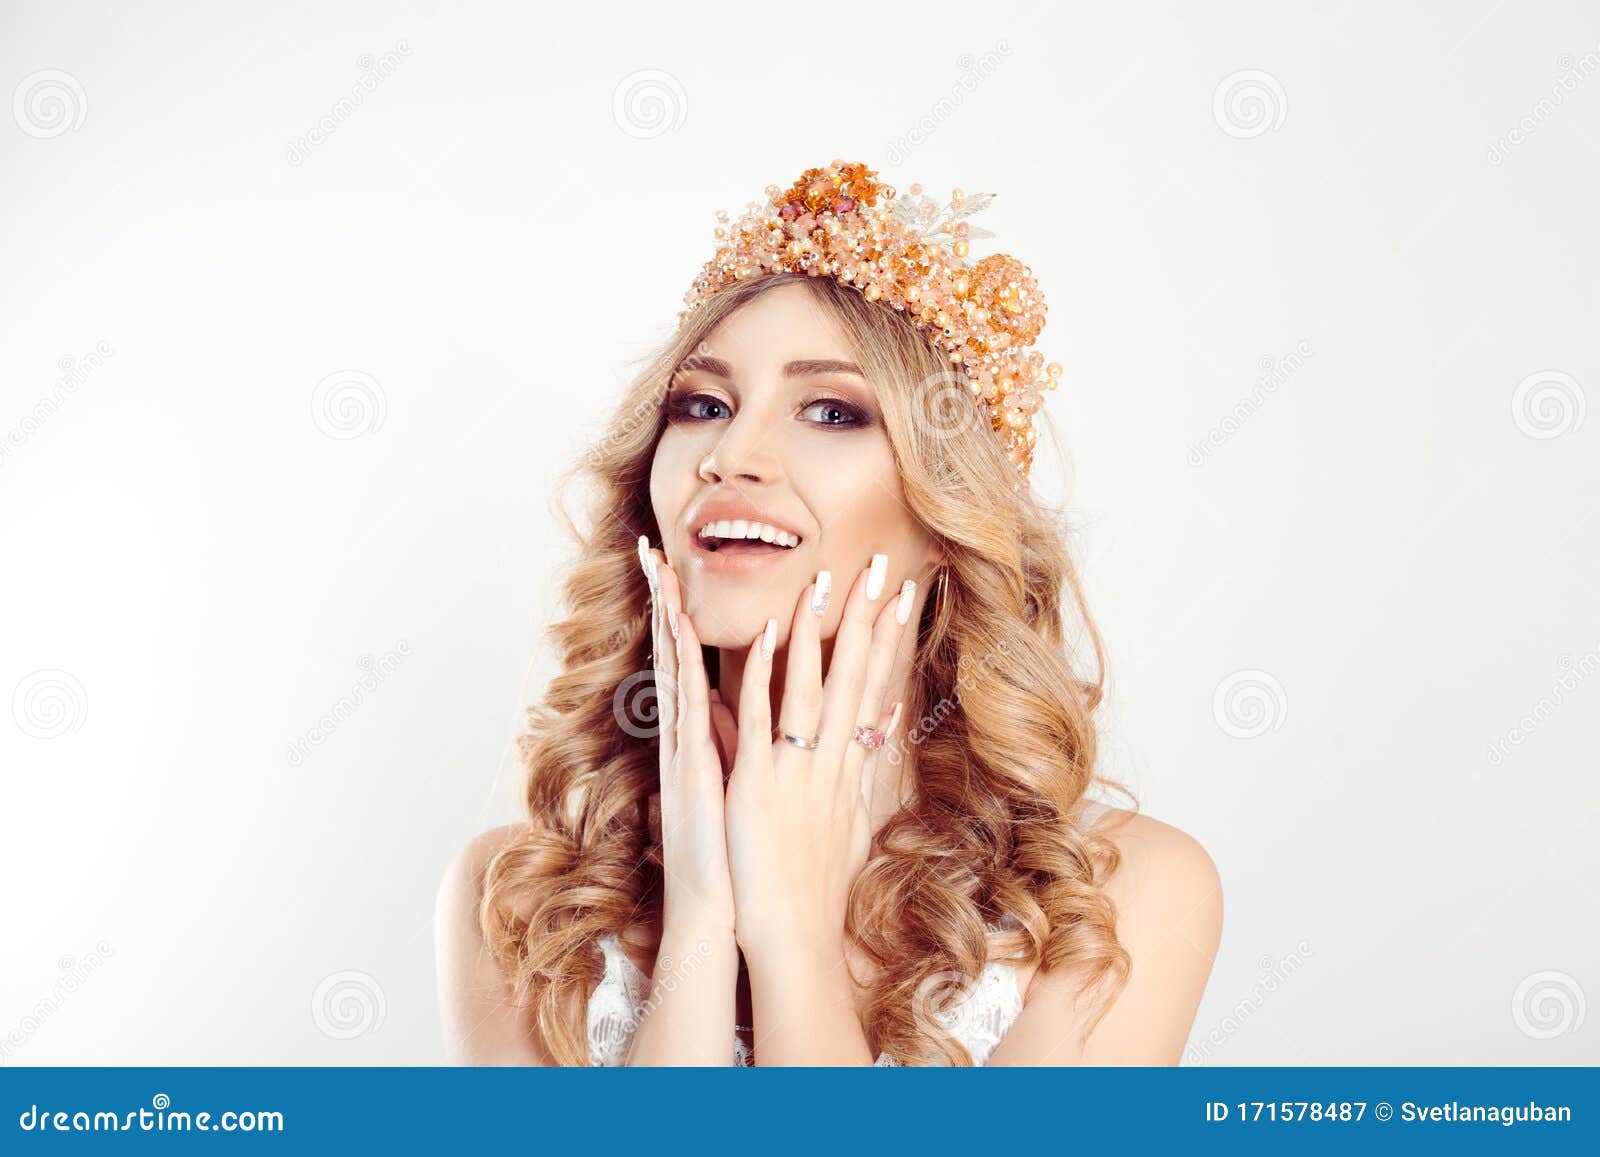 2,258 Be My Queen Royalty-Free Images, Stock Photos & Pictures